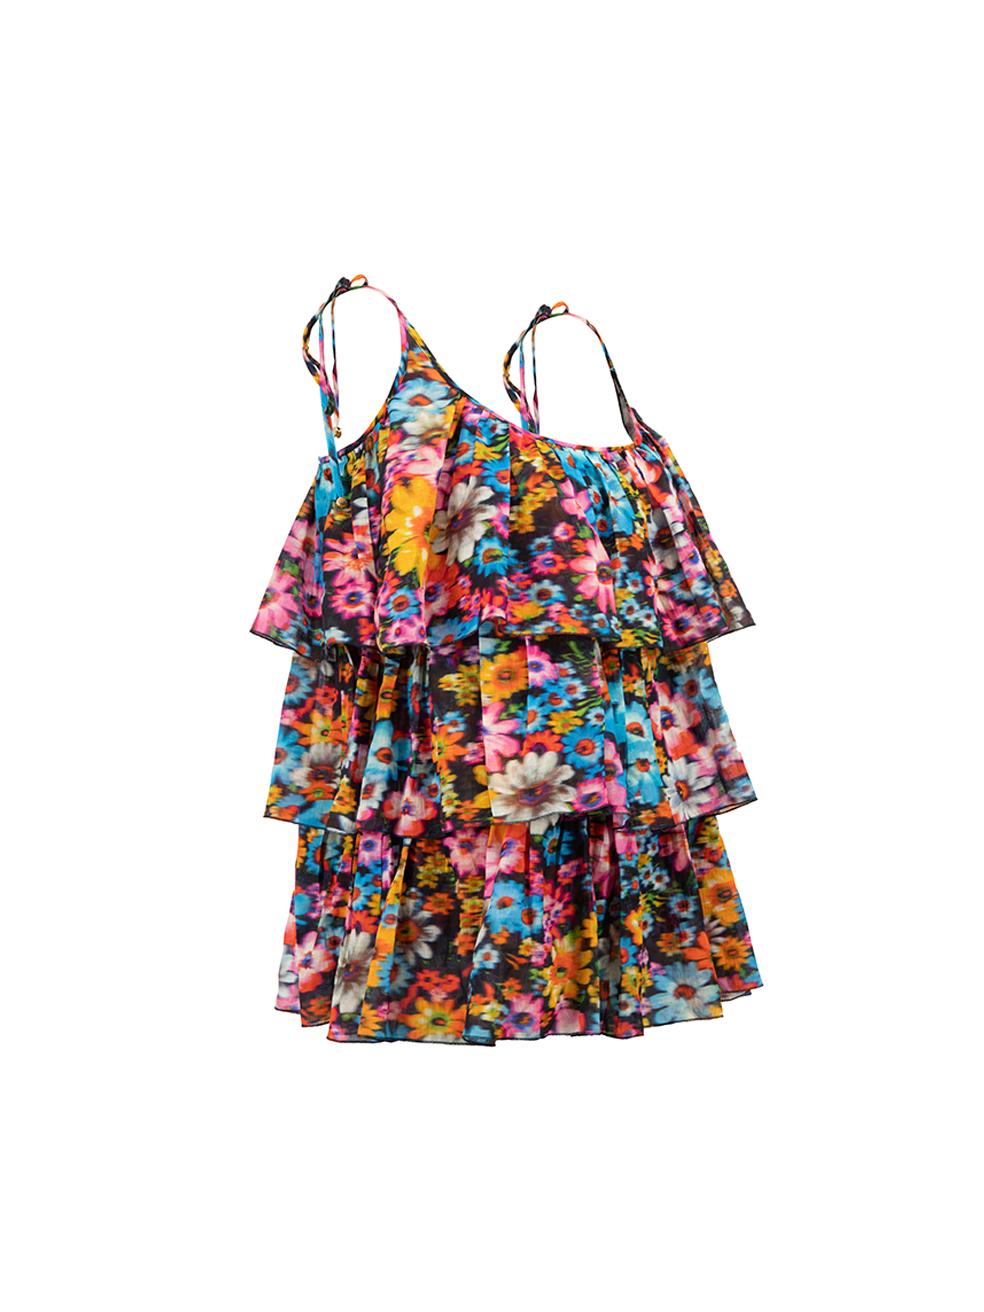 CONDITION is Never worn, with tags. No visible wear to top is evident on this new Stella McCartney designer resale item. 



Details


Multicolour

Cotton

Sleeveless top

Floral print pattern

Ruffles tiered accent

Tie shoulder straps